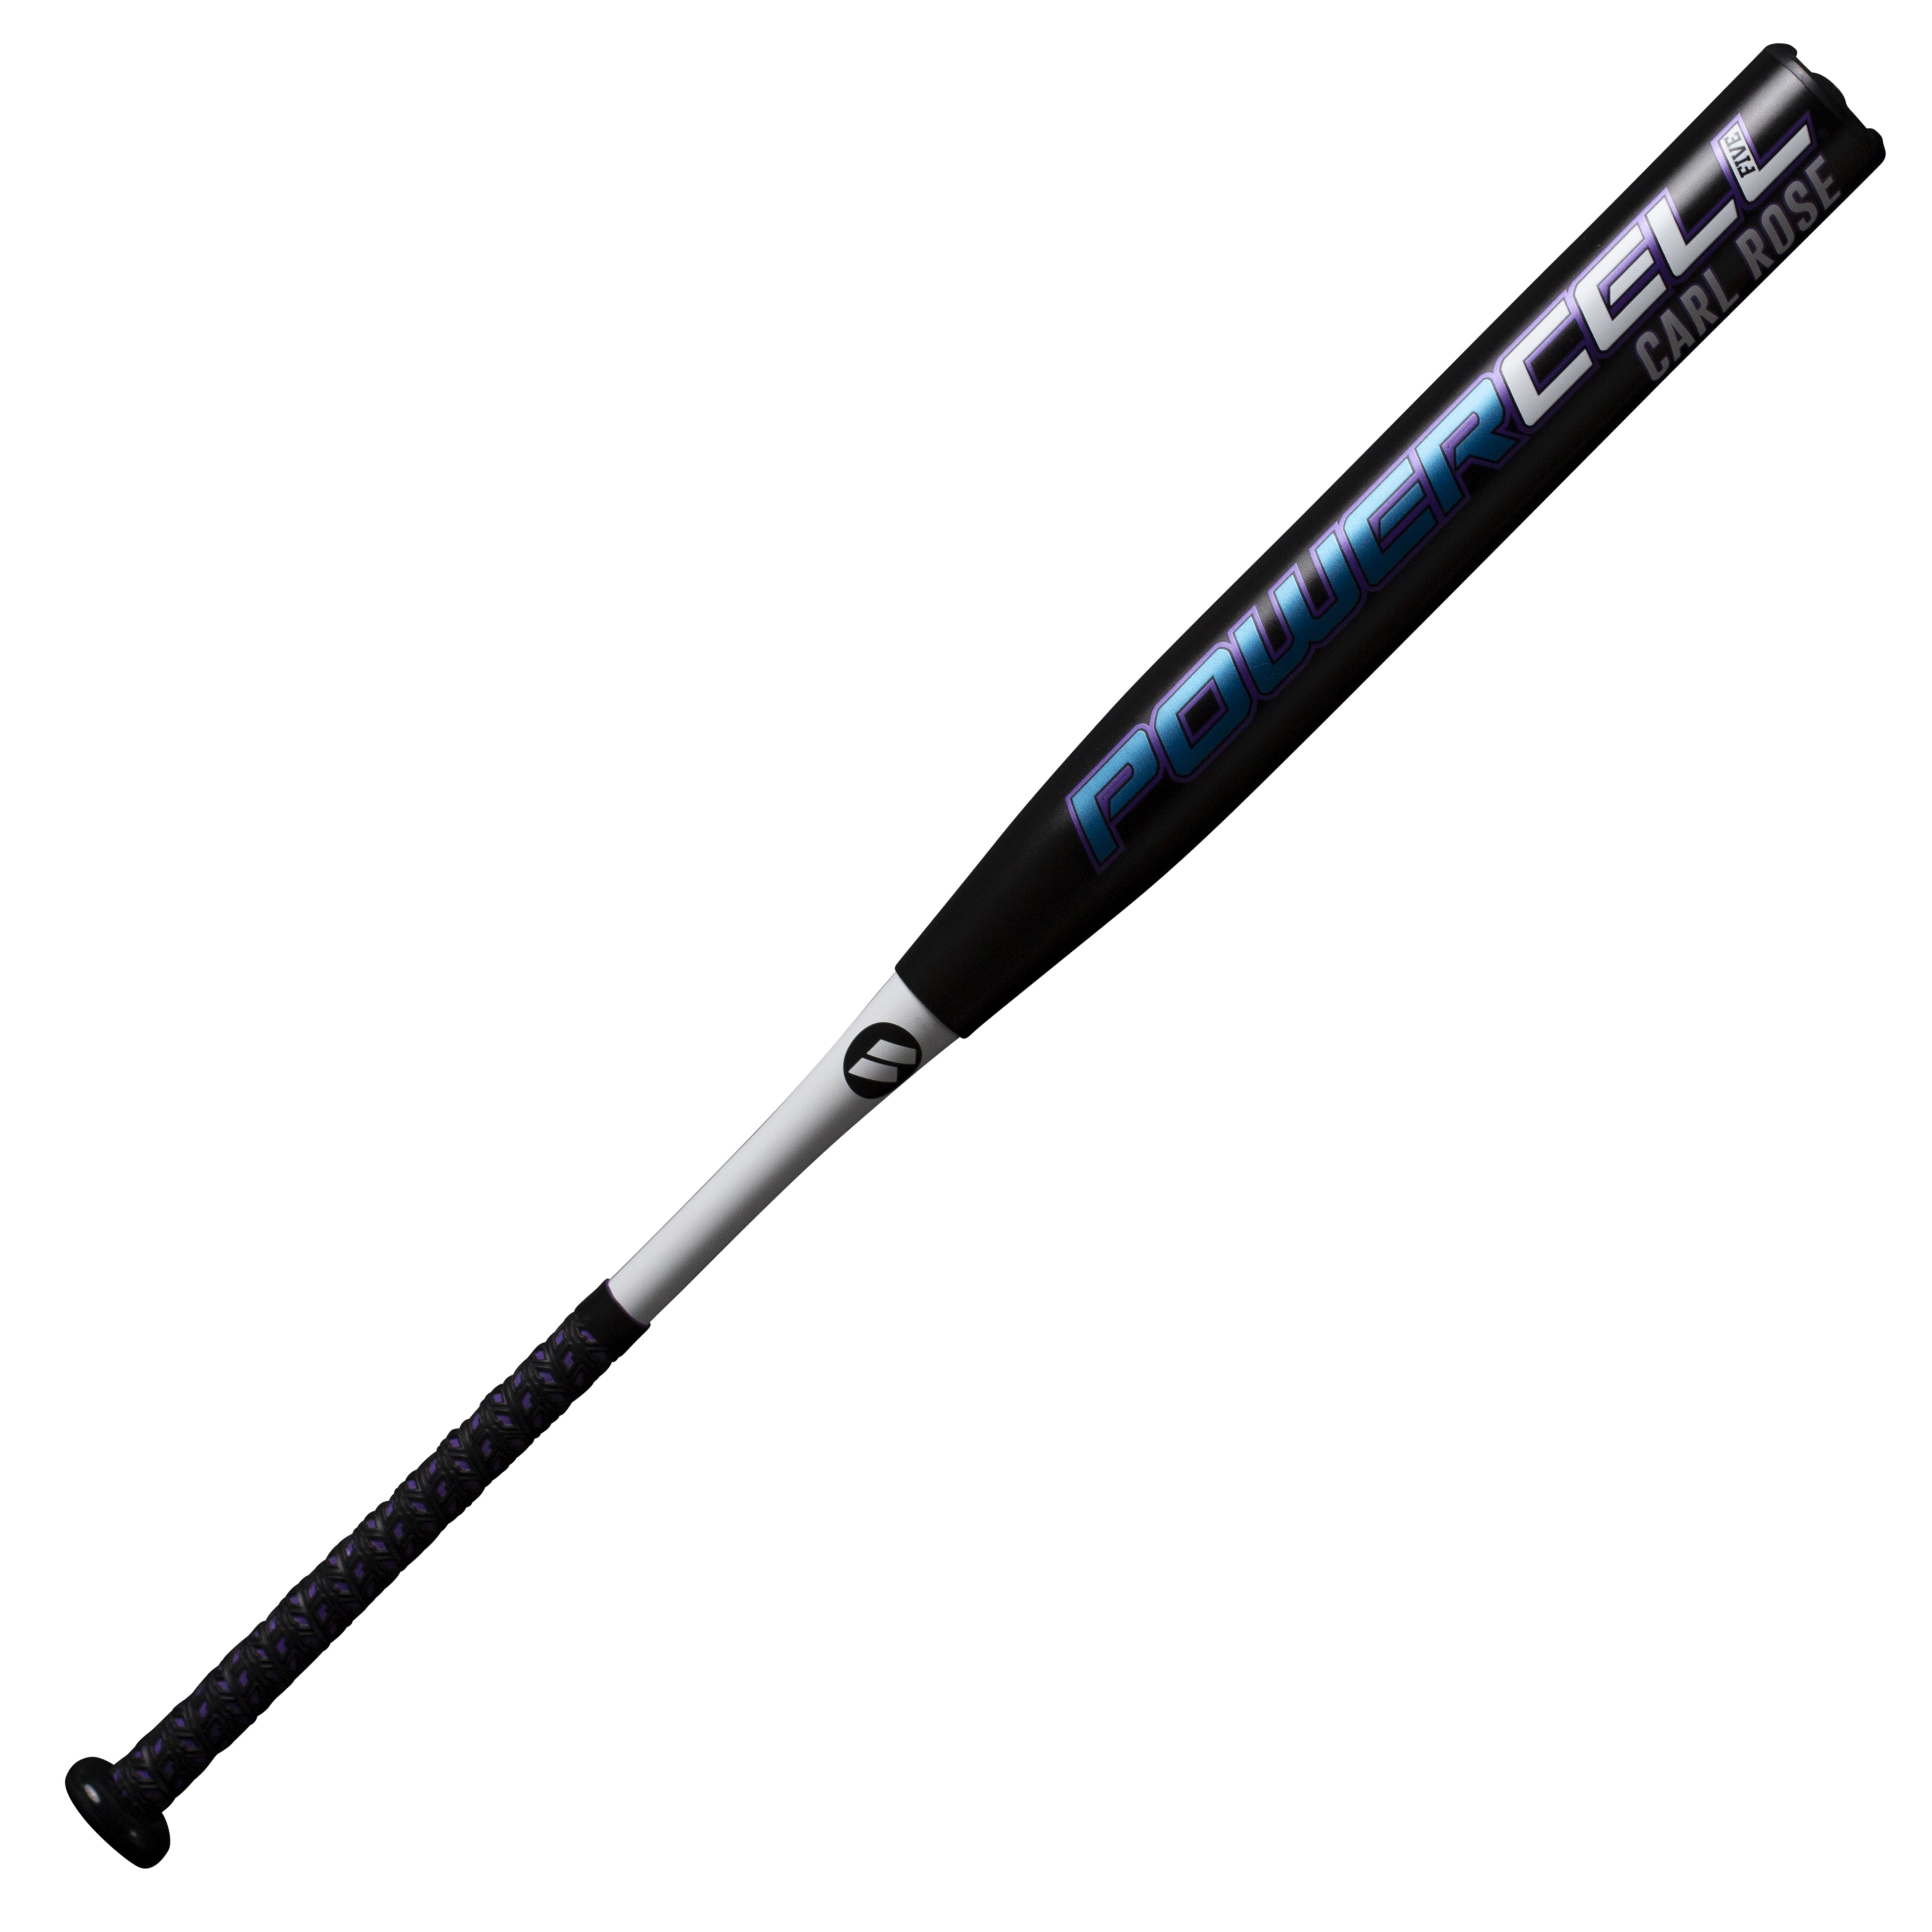 Worth Softball Bat honoring Carl Rose. The 2021 Worth Slow pitch Softball Bat features a 13.5 inch Barrel, XL .5 oz End load, and is a limited edition of only 1500 bats made. This Worth Powercell features the new 240 compression and NTS Testing. The X434 Barrel utilizes exclusive carbon fiber and advanced resin systems. This increases material content to allow for better barrel flex and performance. Worth retooled their handle using the Flex 75 handle which is engineered to optimize whip and feel on their two piece bats. Adding a Opti Grip Knob helps provide added comfort on swings. PRODUCT FEATURES Brand: WorthSize: 2 1/4 inCertification: USSSA, NSA, ISAMade in USAFrame: Two-PieceMaterial: CompositeFlex 75: Engineered to optimize the whip and feel for our two piece bats.X434 Barrel: The X434 Barrel utilizes exclusive carbon fiber and advanced resin systems, increasing material content to allow for better barrel flex and performance.XL: A .5oz end load for players seeking a moderately end loaded bat, offering more mass in the end of the barrel for extra whip and smoother finishes on swings.Series: PowercellWarranty: 1 YearBarrel Length: 13.5 inYear Released: 2021Weighting: XLLimited Edition Production   